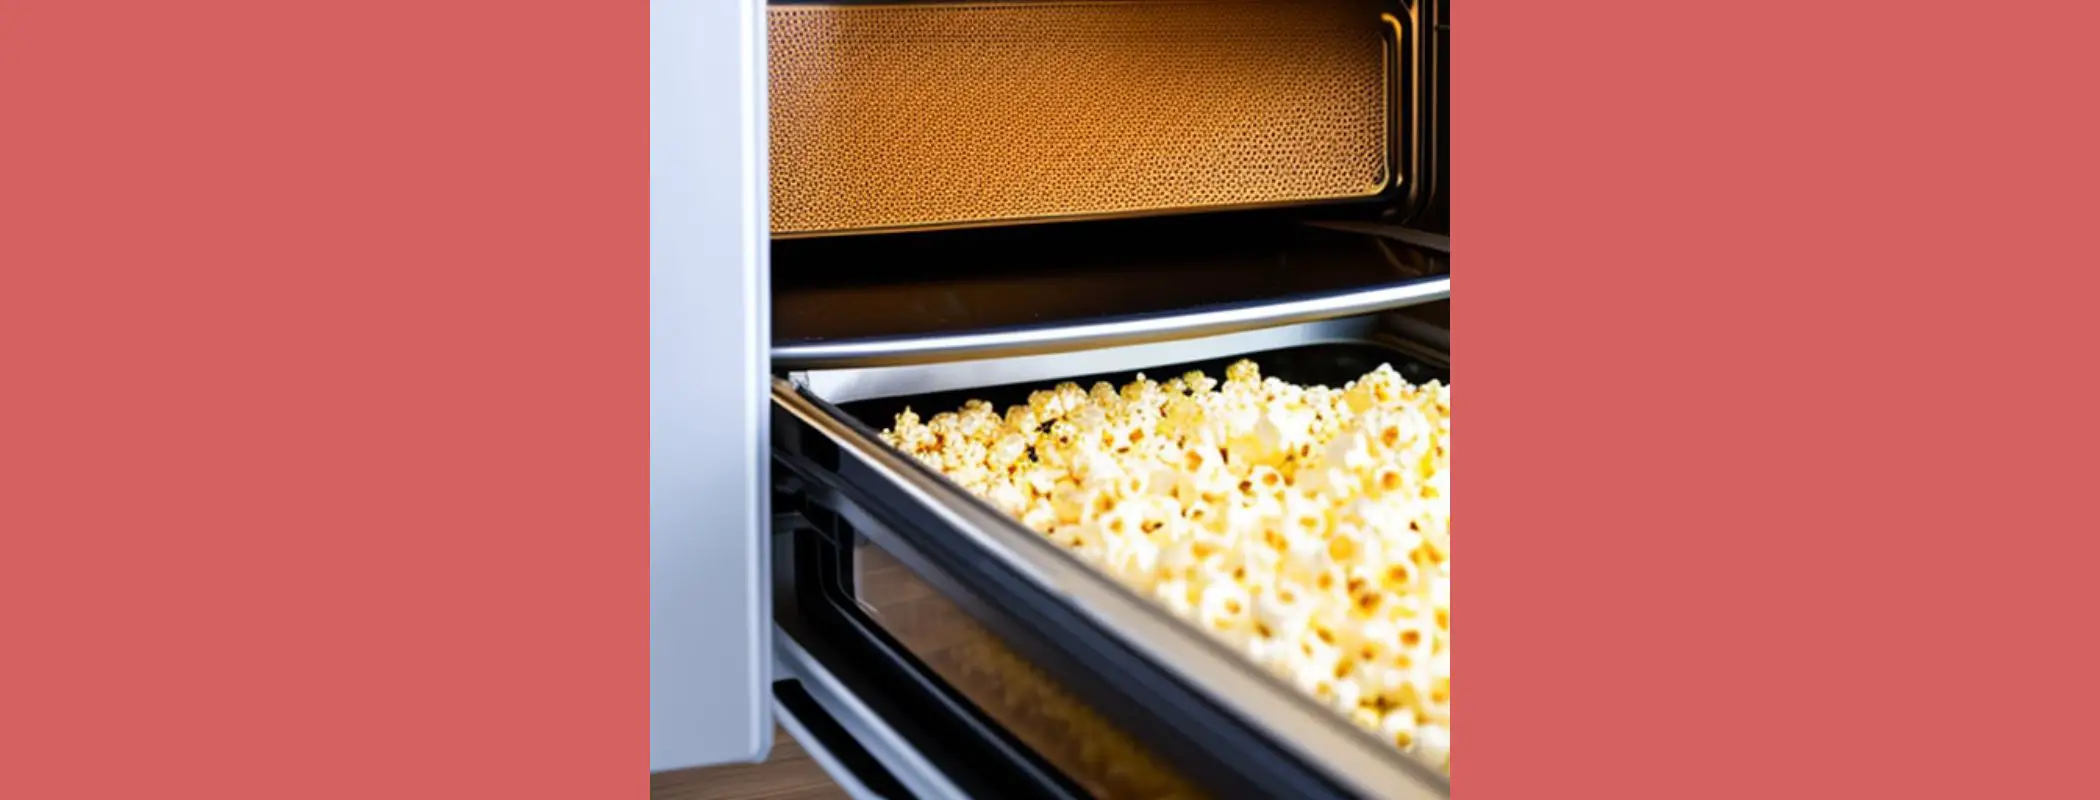 Can You Cook Popcorn In The Oven?